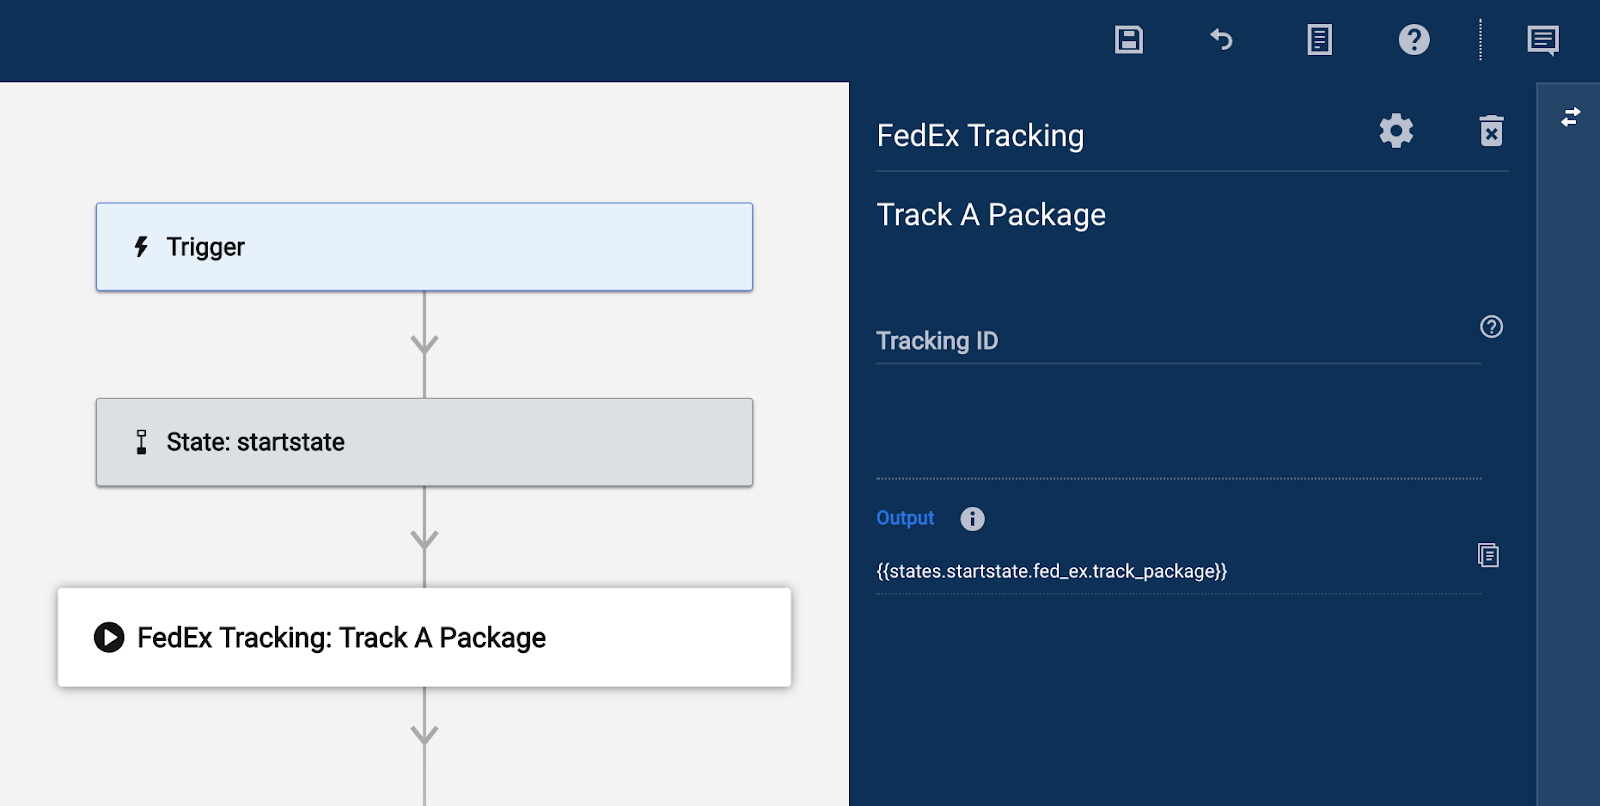 Track a Package